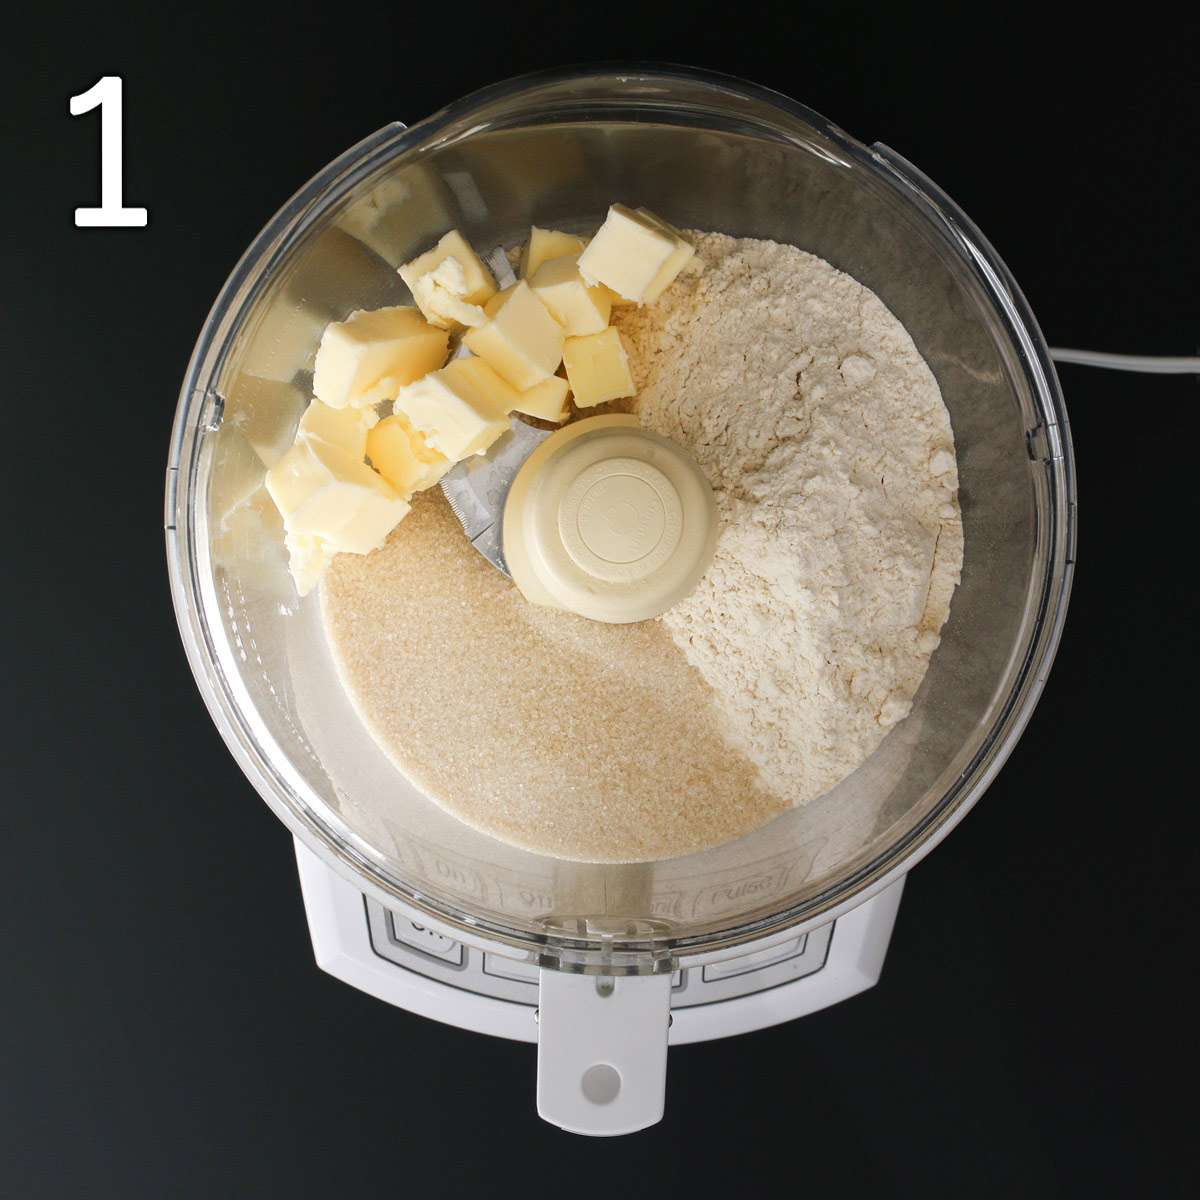 butter, flour, and sugar in bowl of food processor.